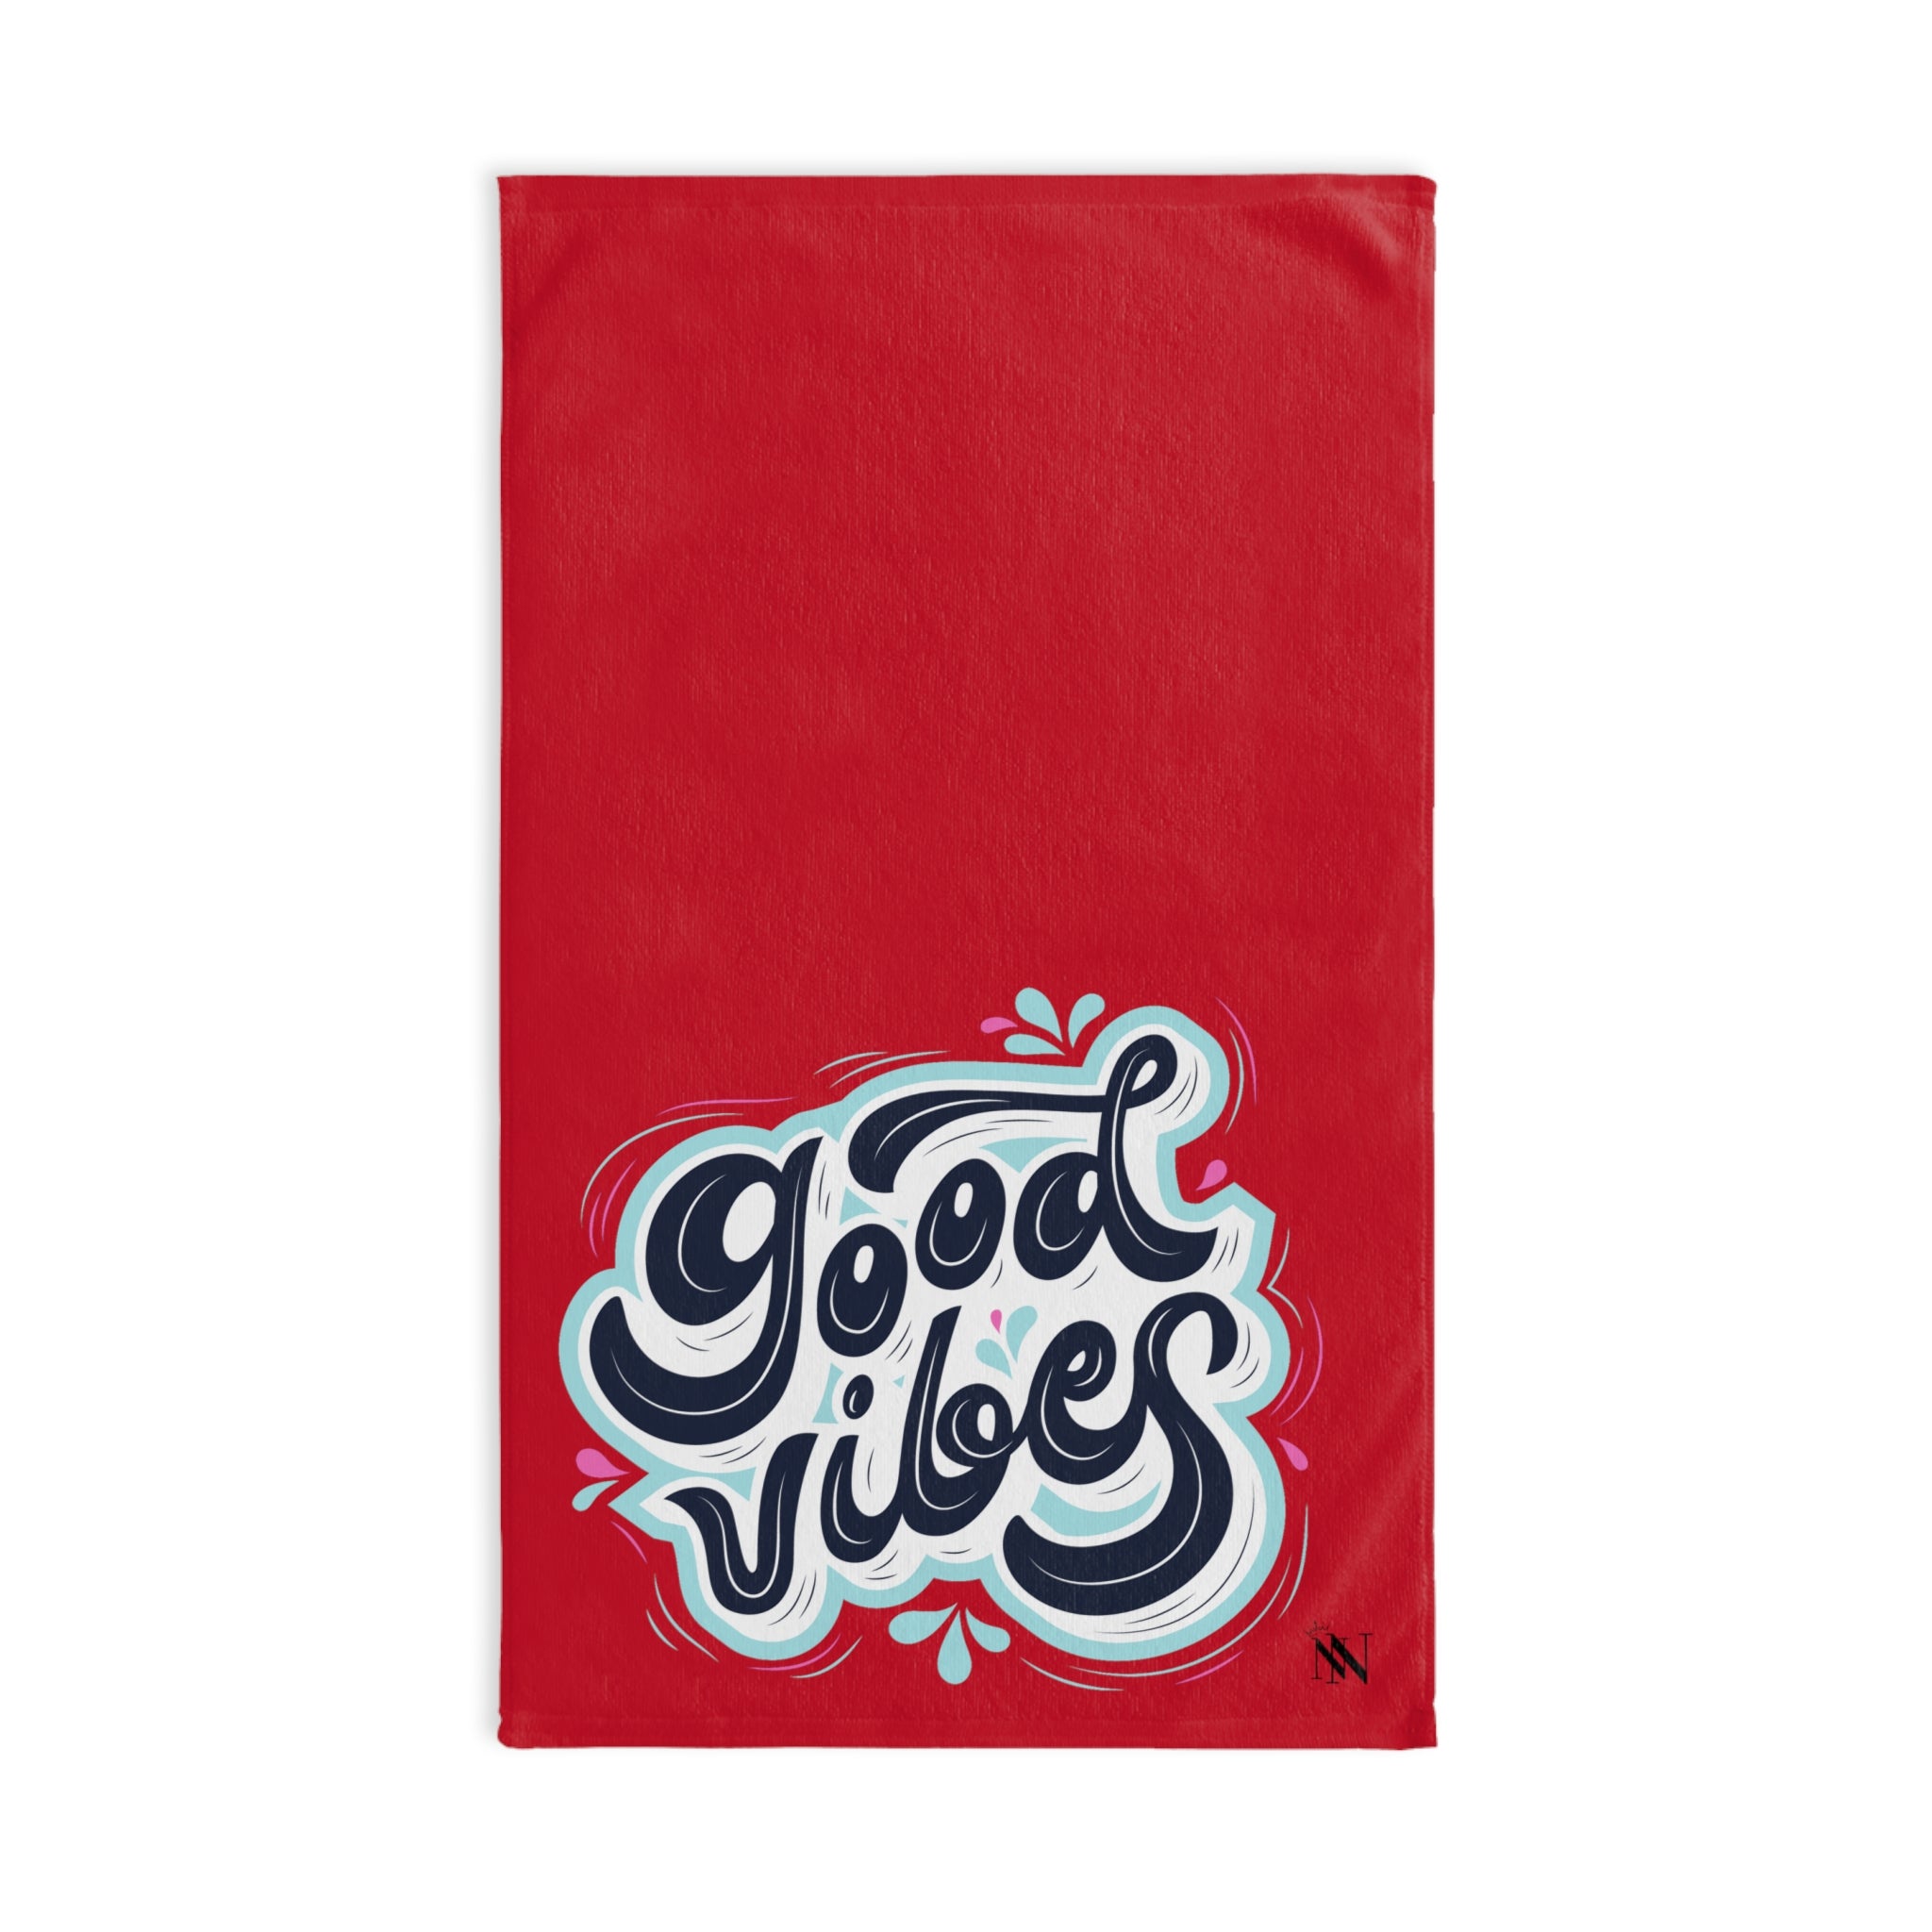 Splash Good Vibes Red | Sexy Gifts for Boyfriend, Funny Towel Romantic Gift for Wedding Couple Fiance First Year 2nd Anniversary Valentines, Party Gag Gifts, Joke Humor Cloth for Husband Men BF NECTAR NAPKINS